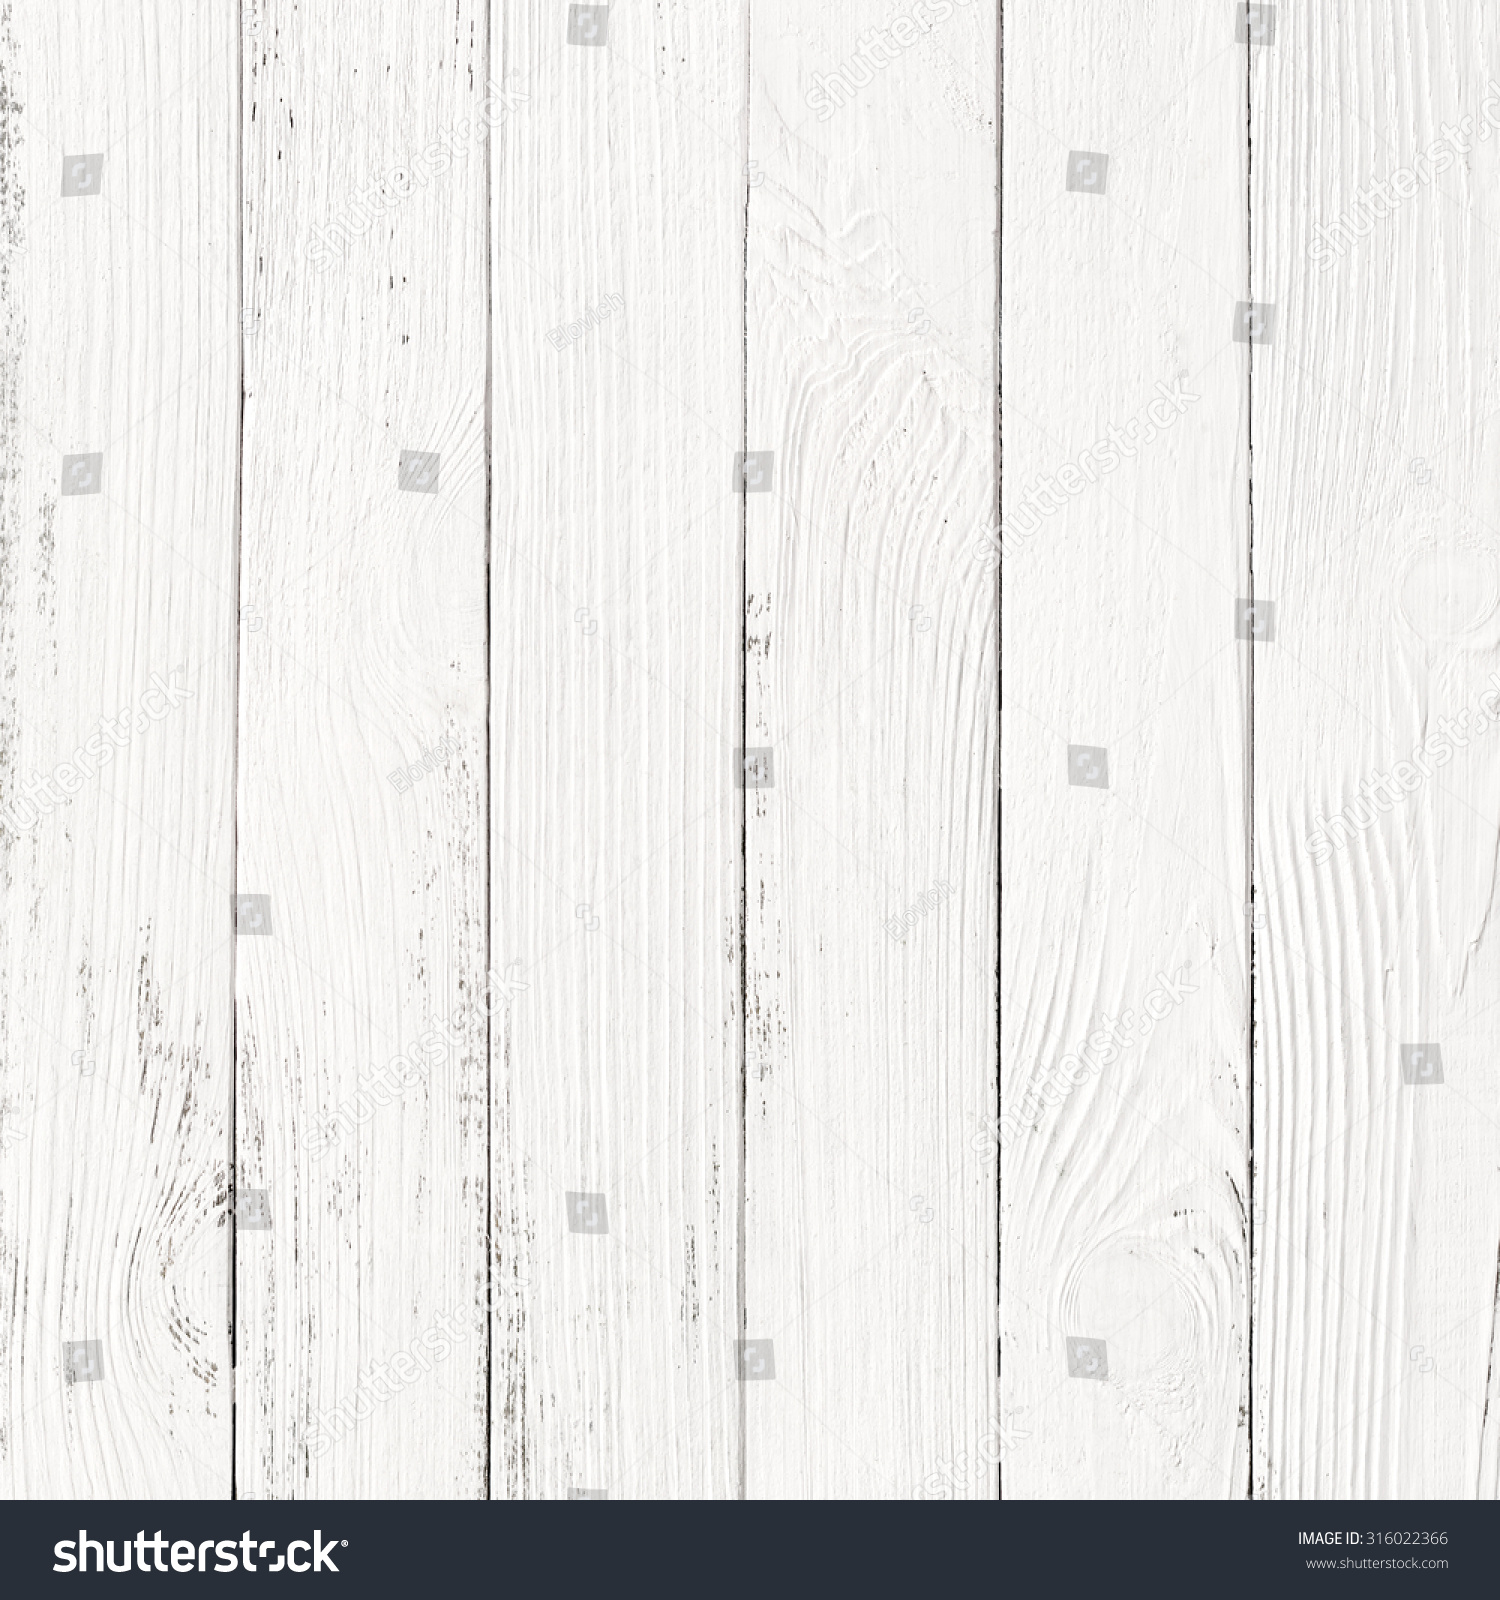 white wood texture backgrounds #316022366